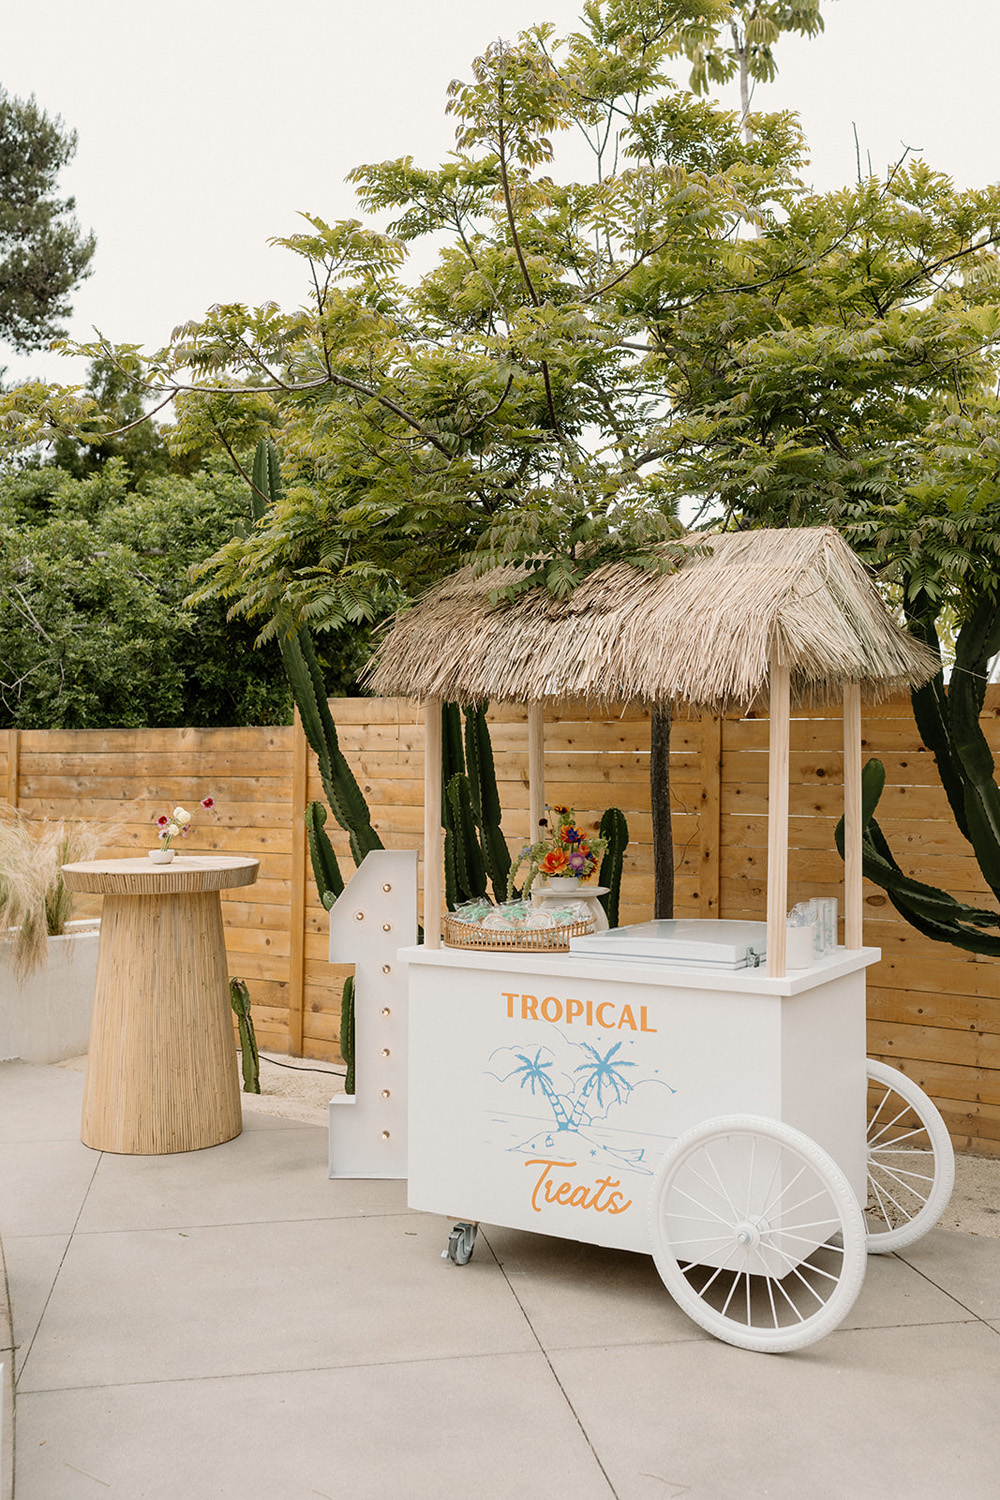 Tropical treats cart for Aloha One first birthday party